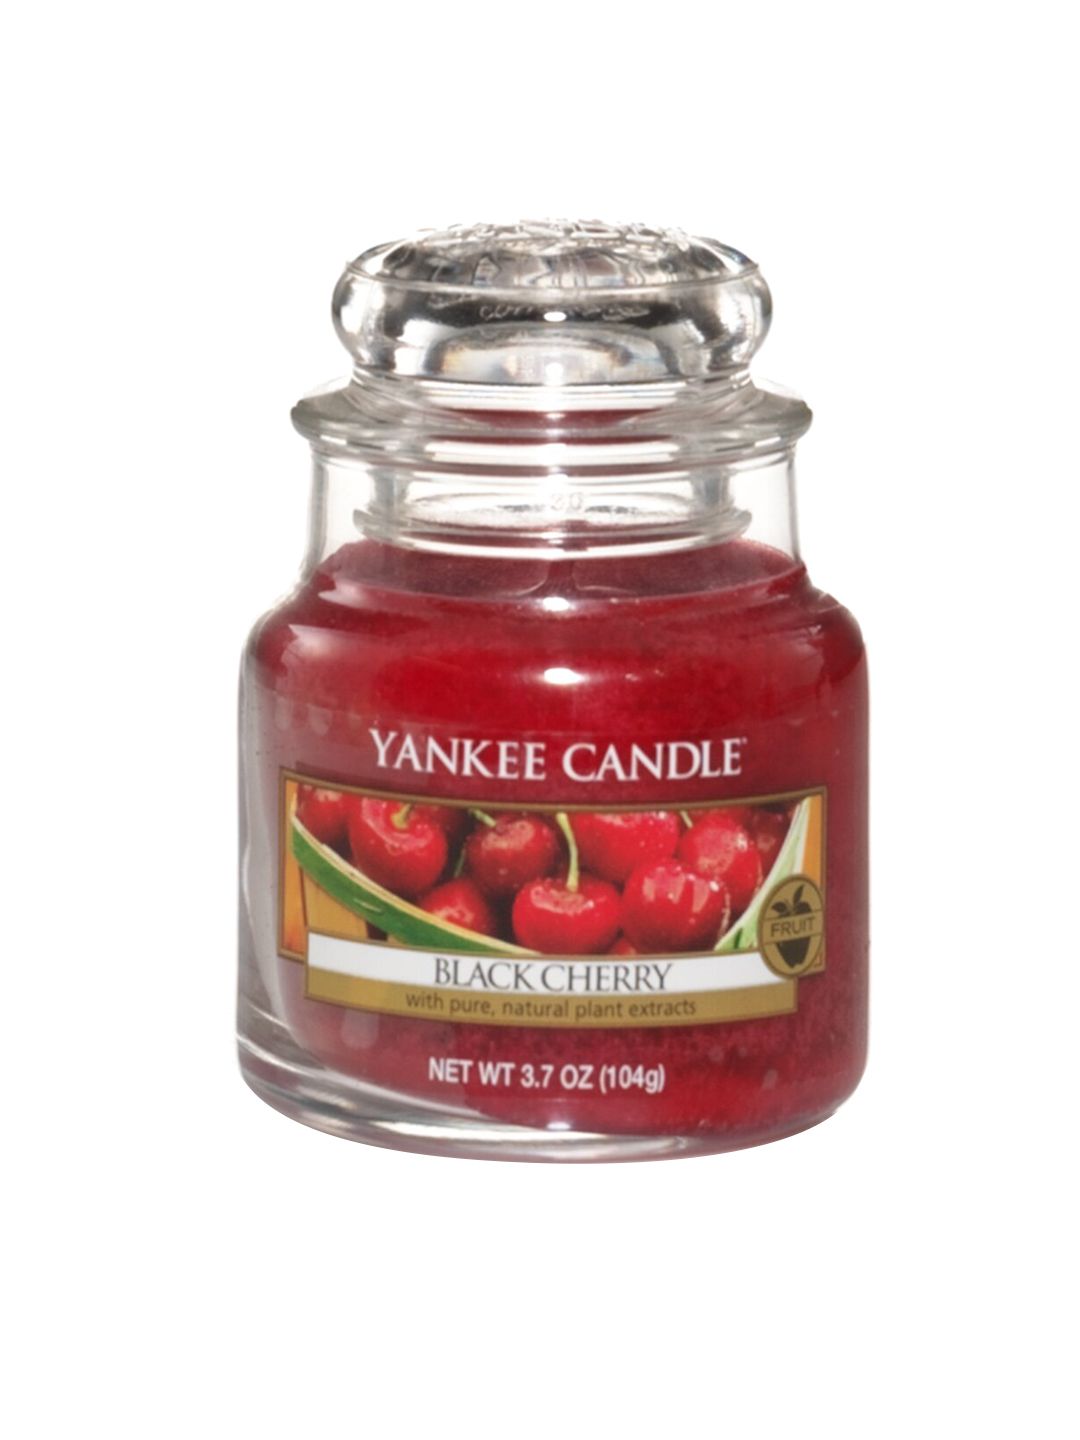 YANKEE CANDLE Red Black Cherry Scented Small Jar Candle Price in India